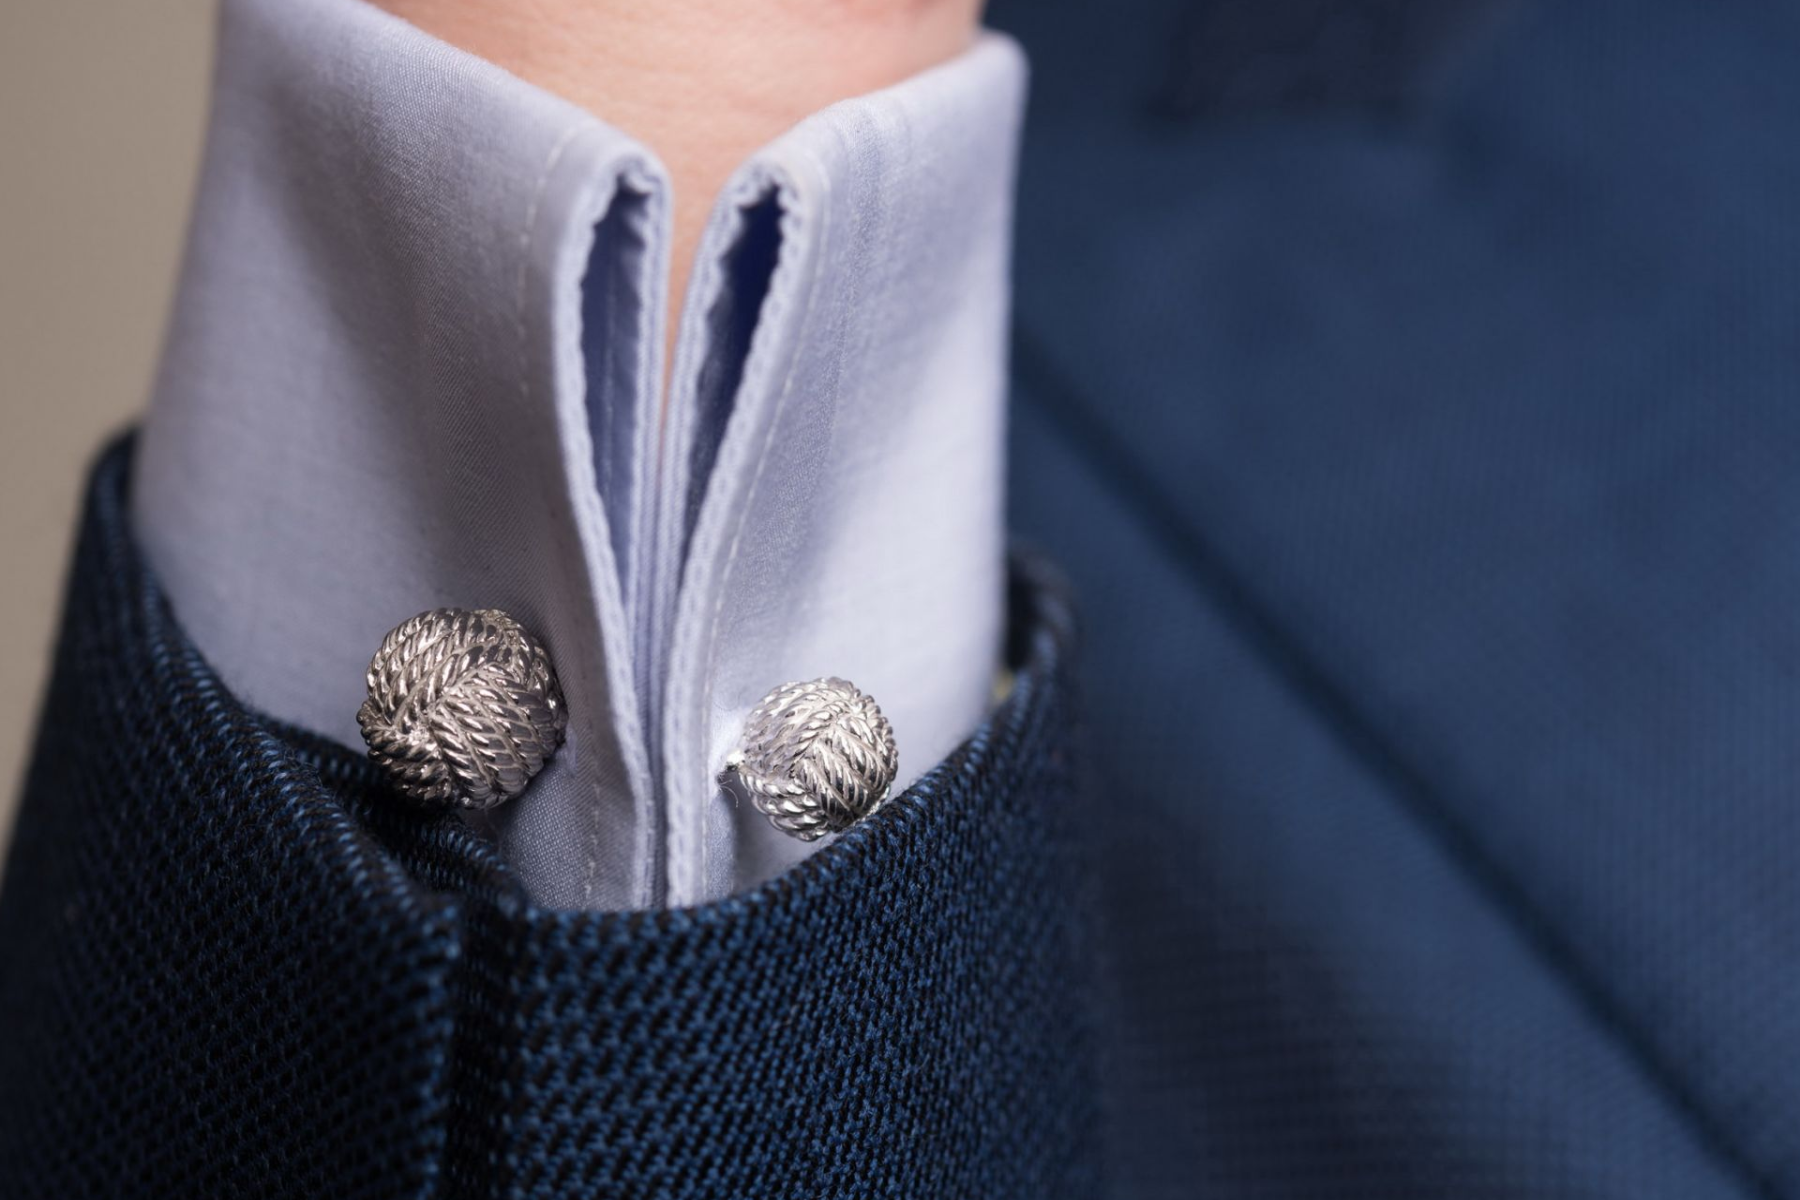 One of the groomsmen was wearing a suit with a platinum cufflink